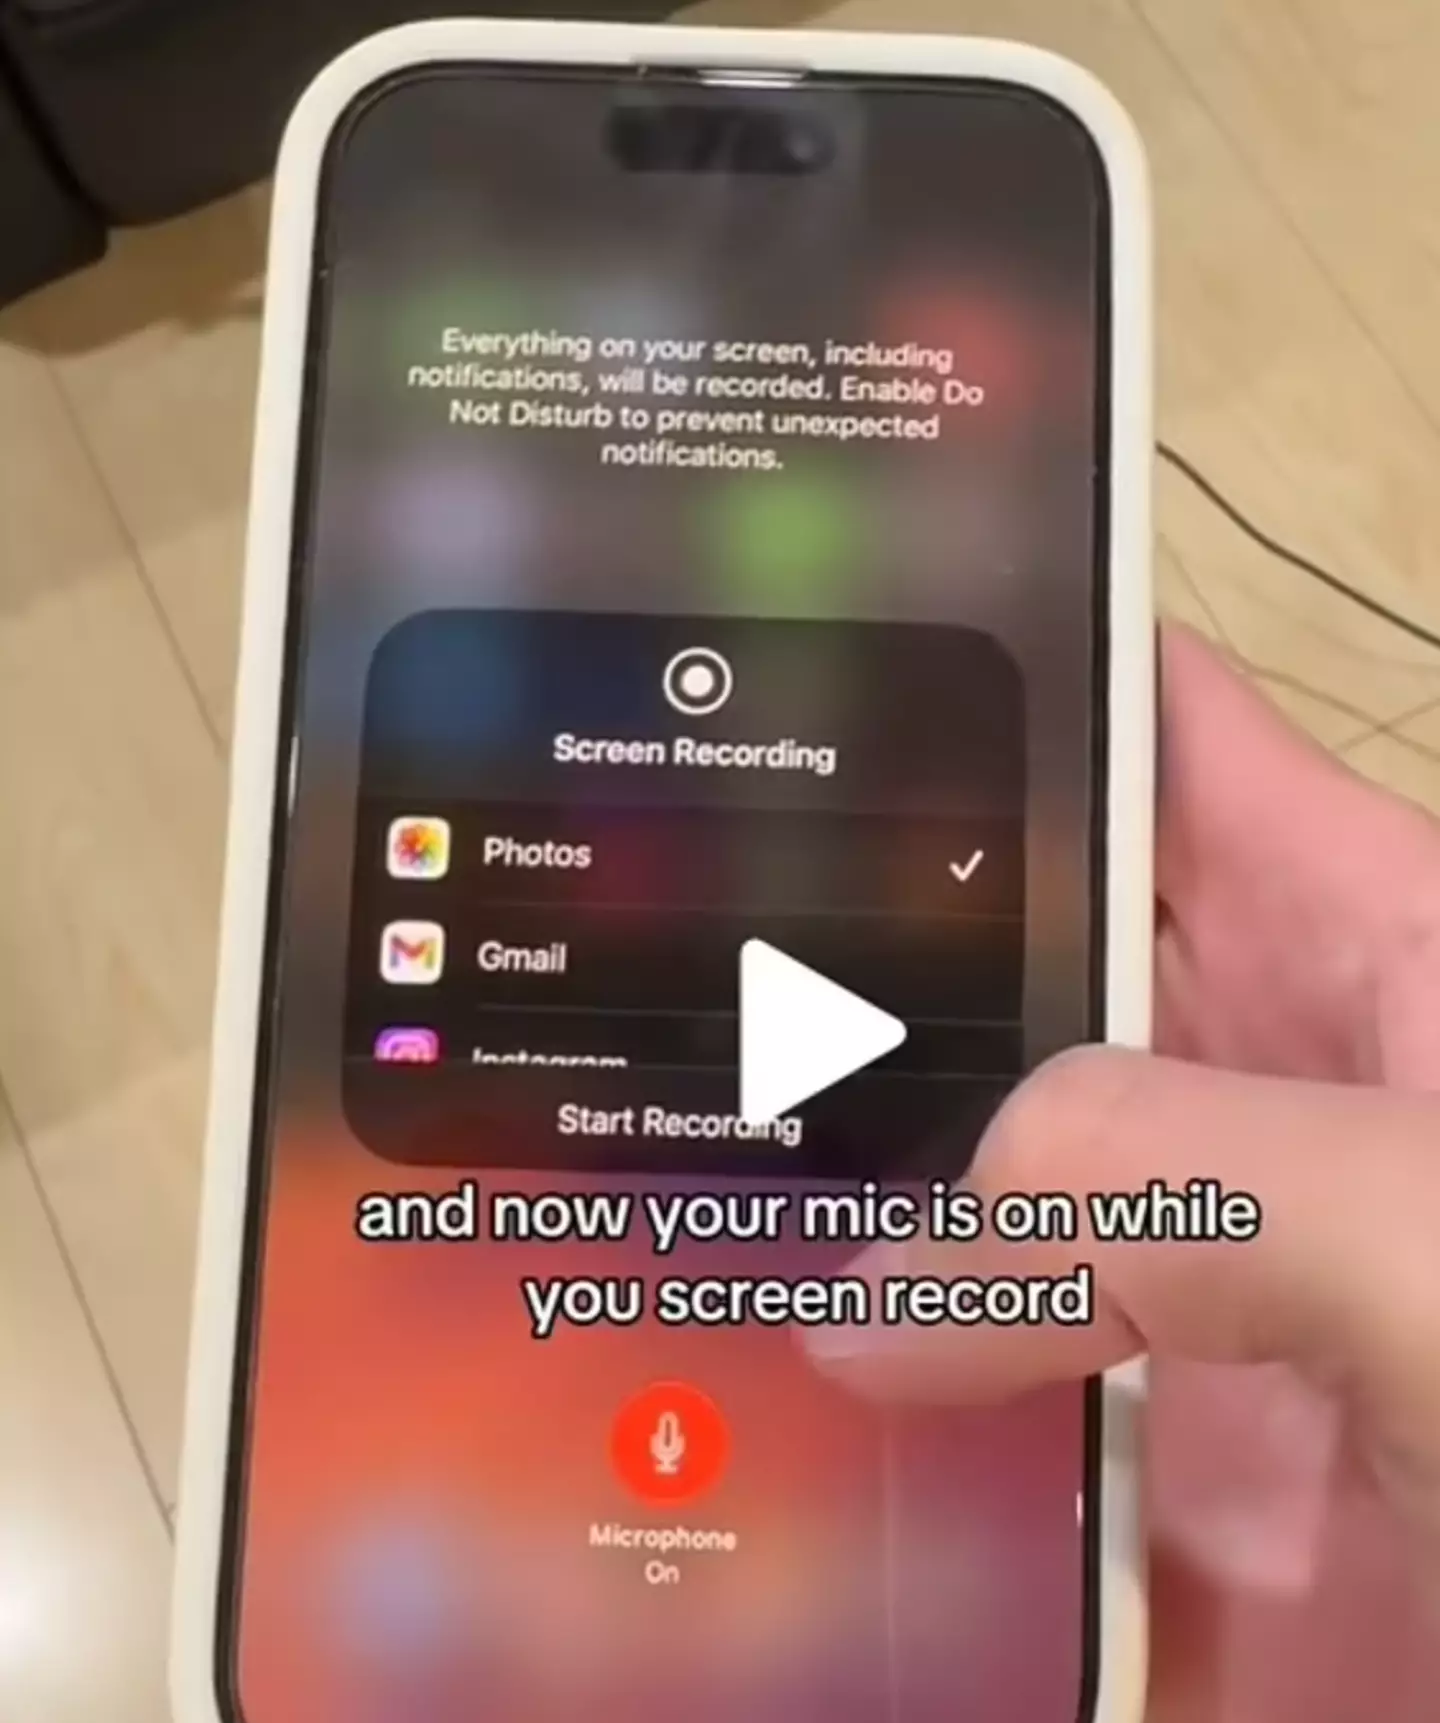 The ex apple employee offered tips to iphone users. Credit:Tiktok/hitomidocameraroll